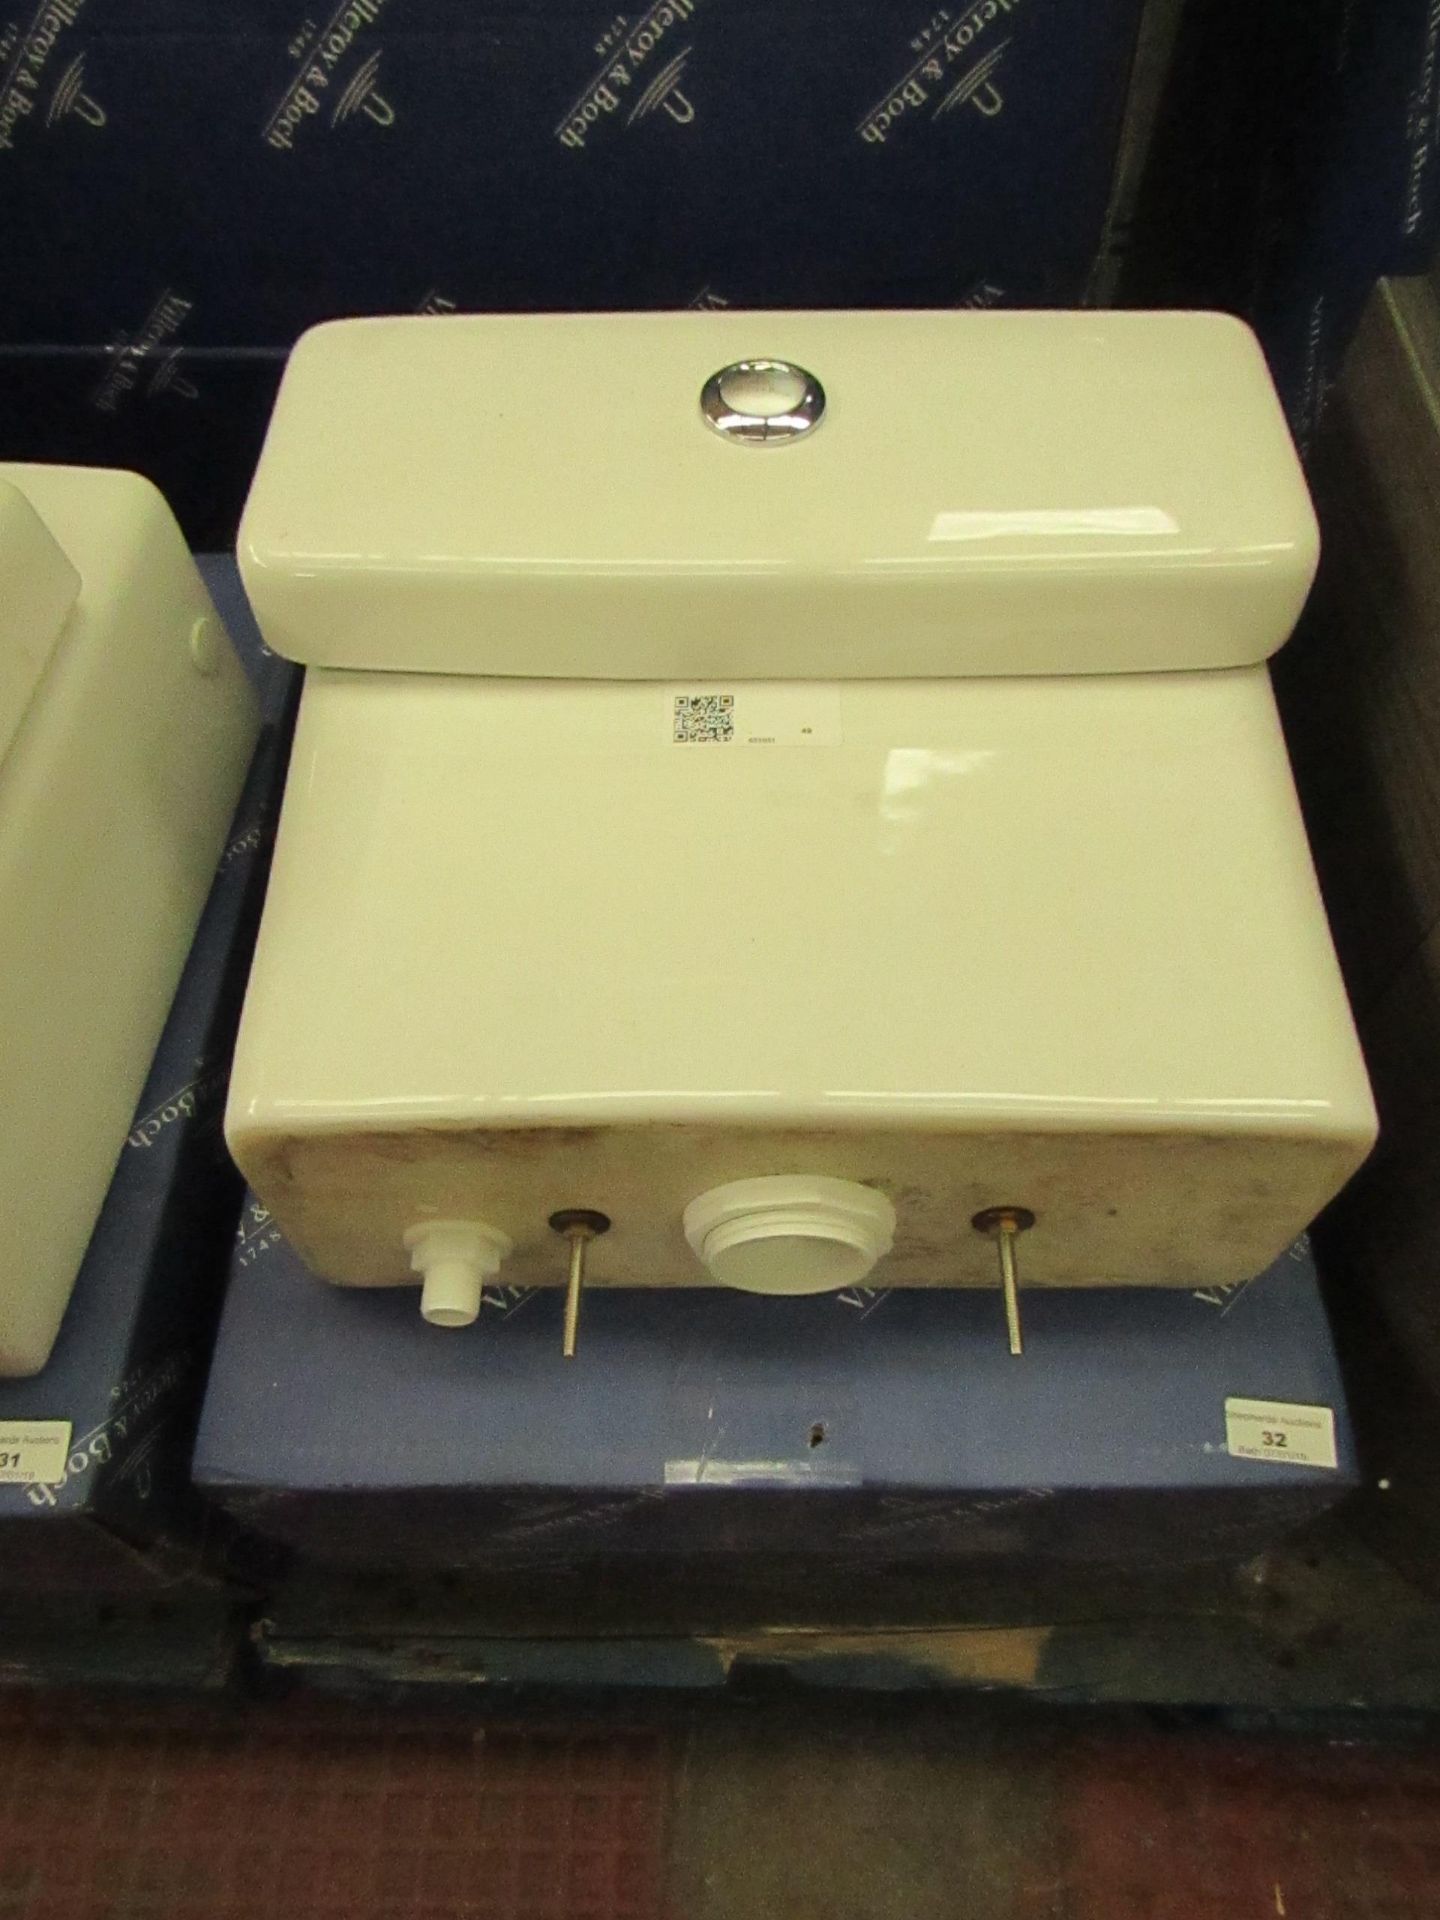 Villeroy and Boch cistern with flush system, new and boxed.